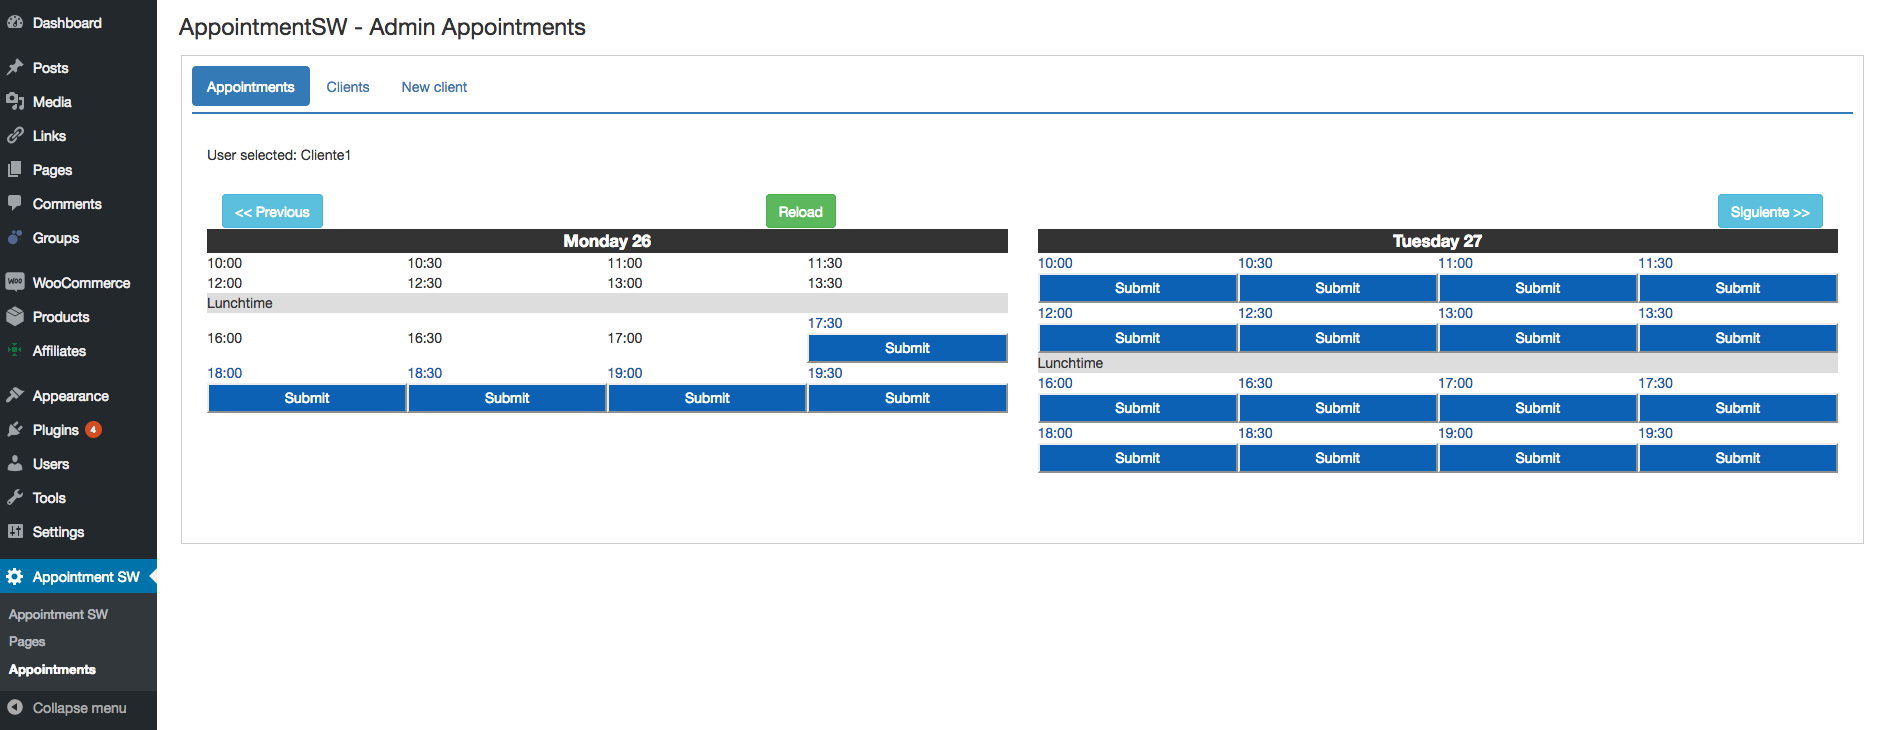 AppointmentSw > Appointments dashboard section.